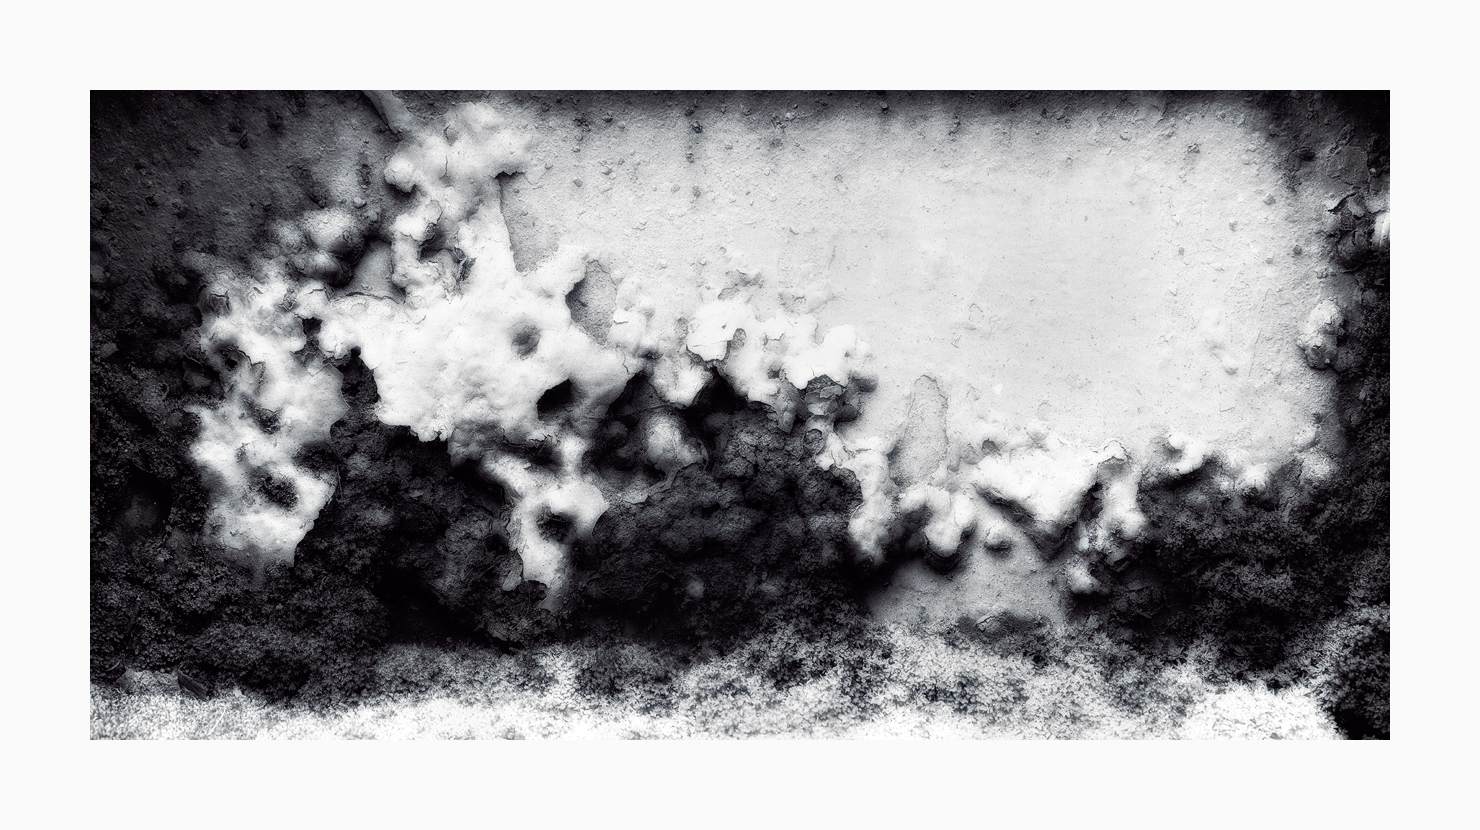 Fine art image of a section of rusting steel suggesting classical Chinese ink landscape aesthetics.